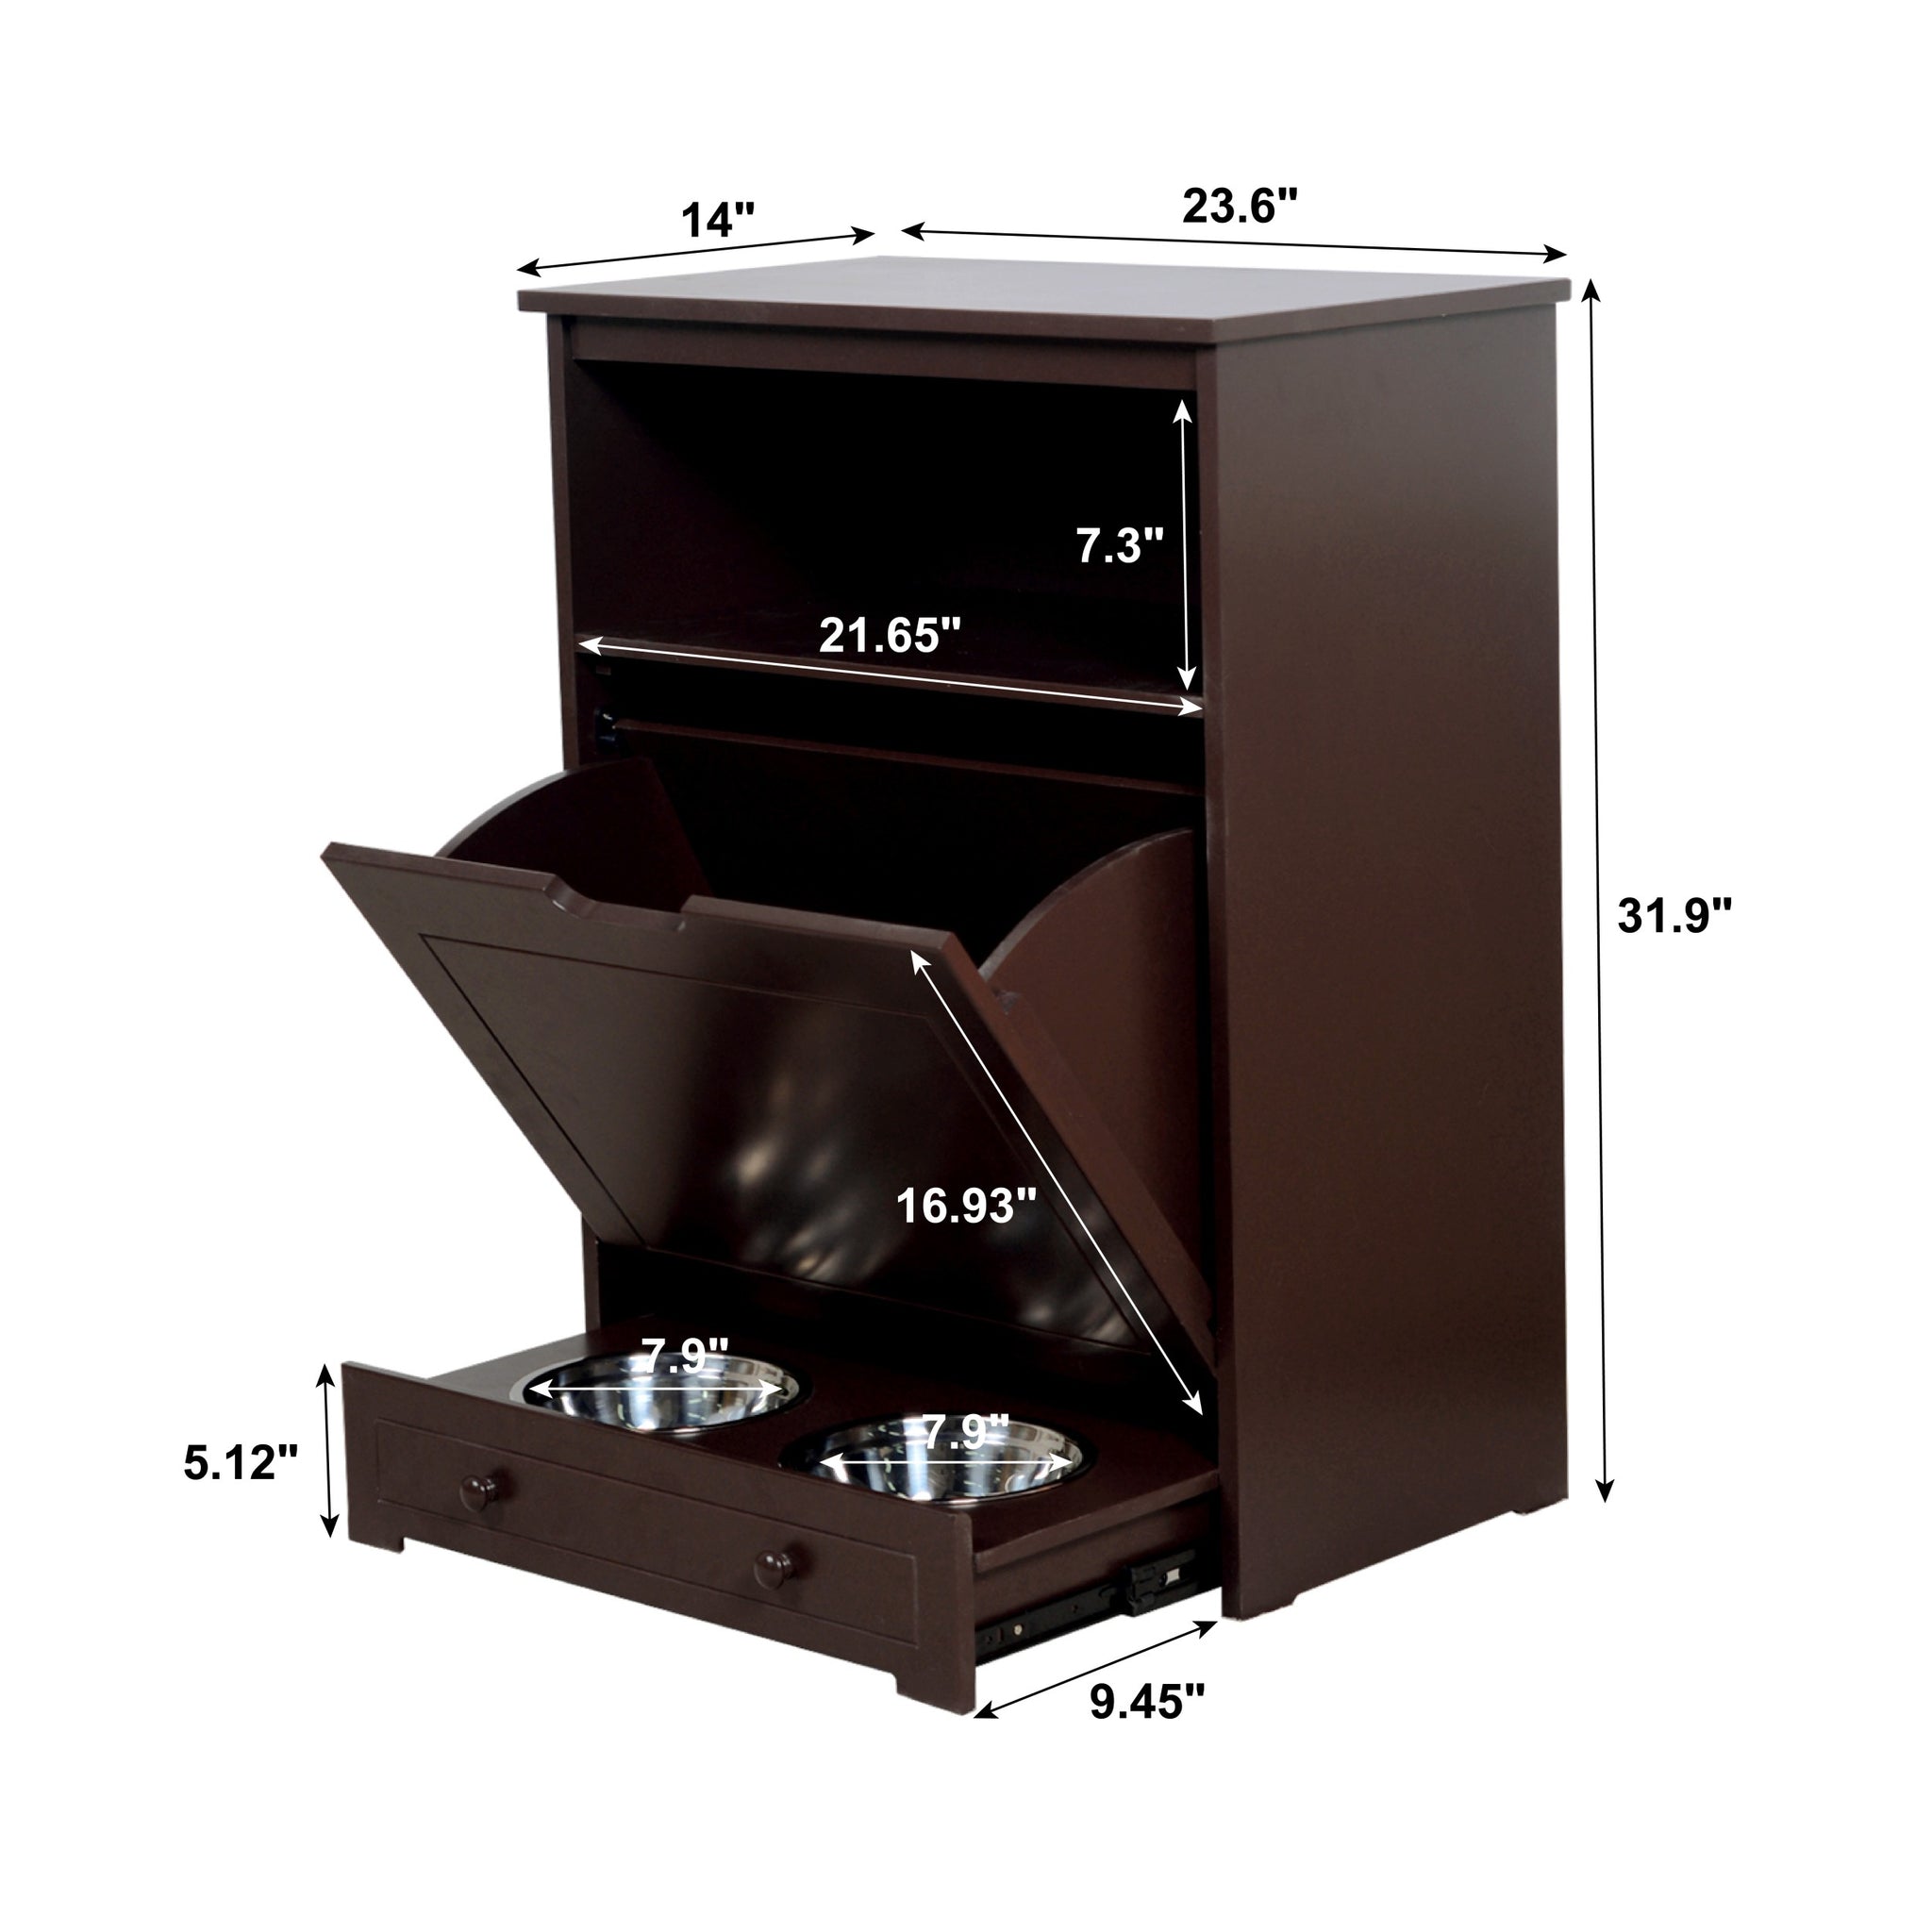 Pet Feeder Station with Storage,Made of Mdf and